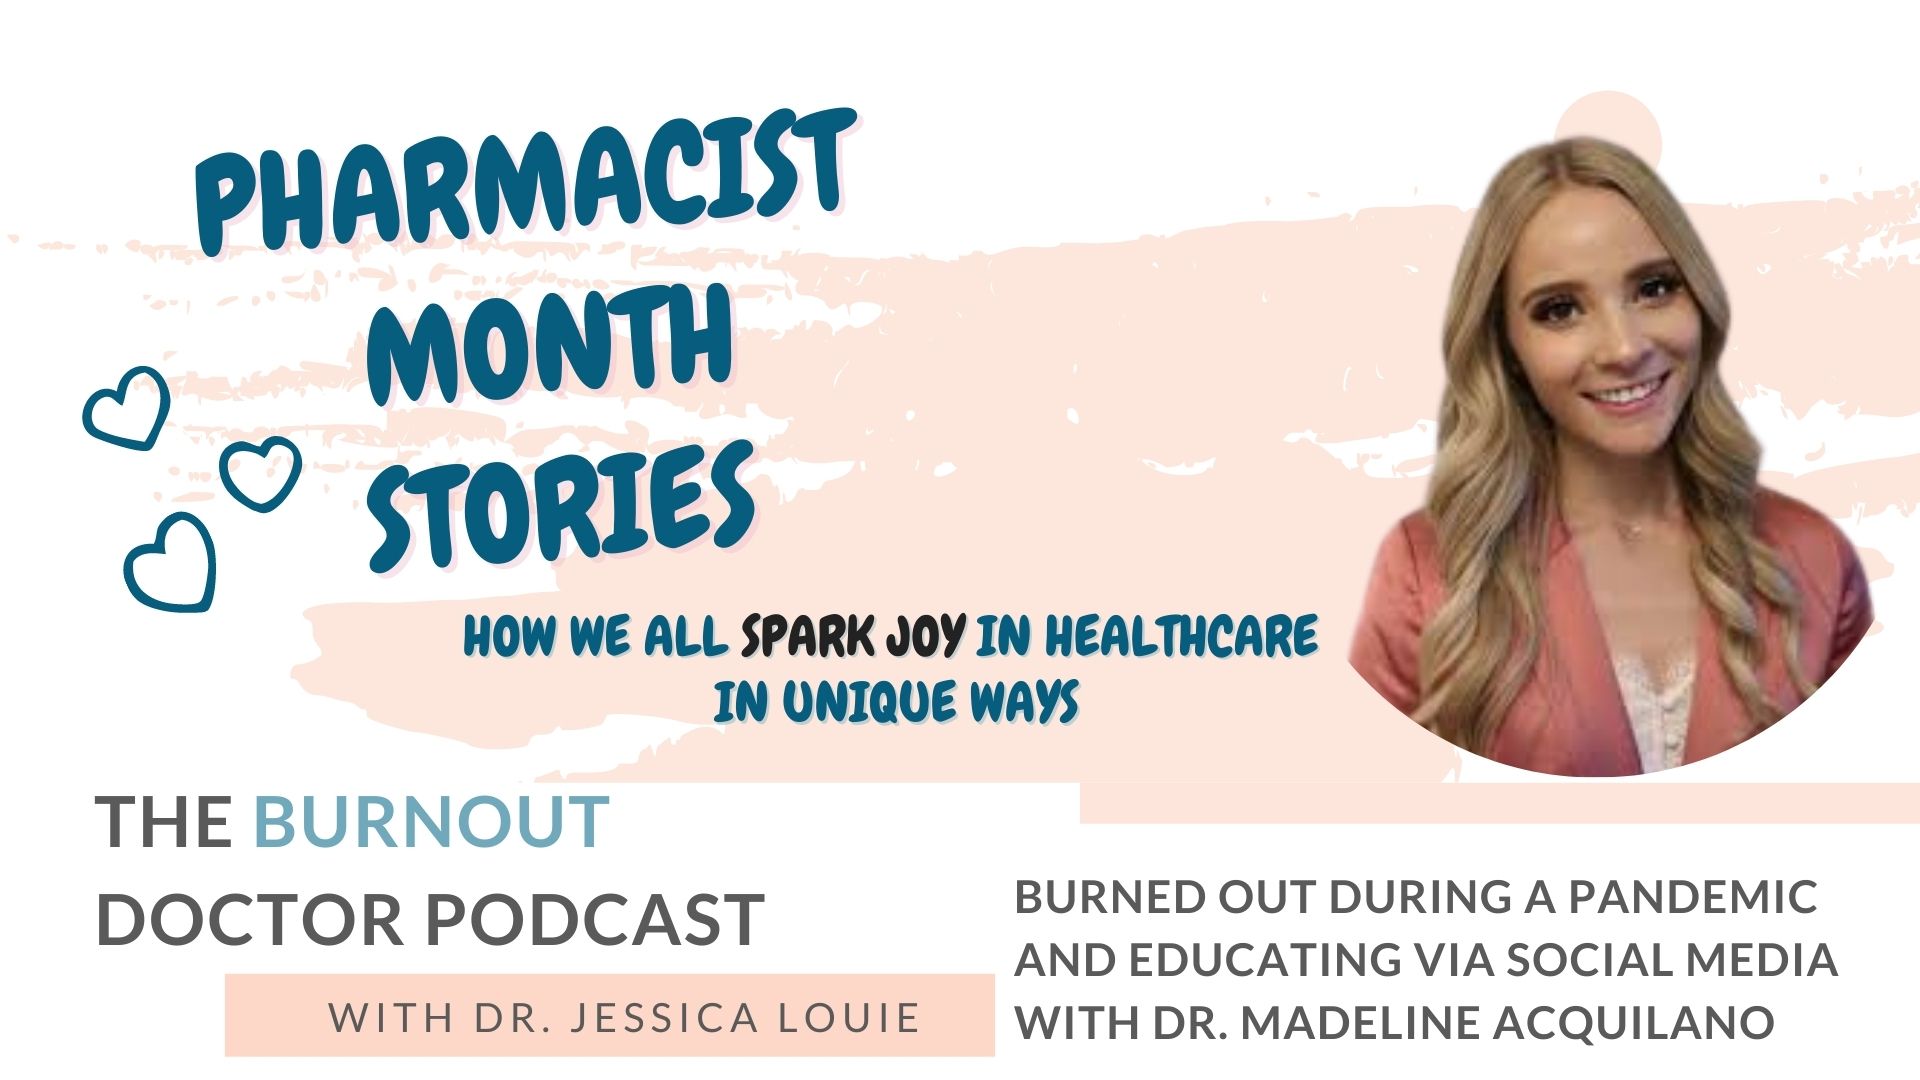 Dr. Madeline Acquilano on The Burnout Doctor Podcast. Pharmacist burnout stories. Pharmacist Month Stories. The Luxe Pharmacist. Dr. Jessica Louie Simplifying healthcare families, KonMari Method.